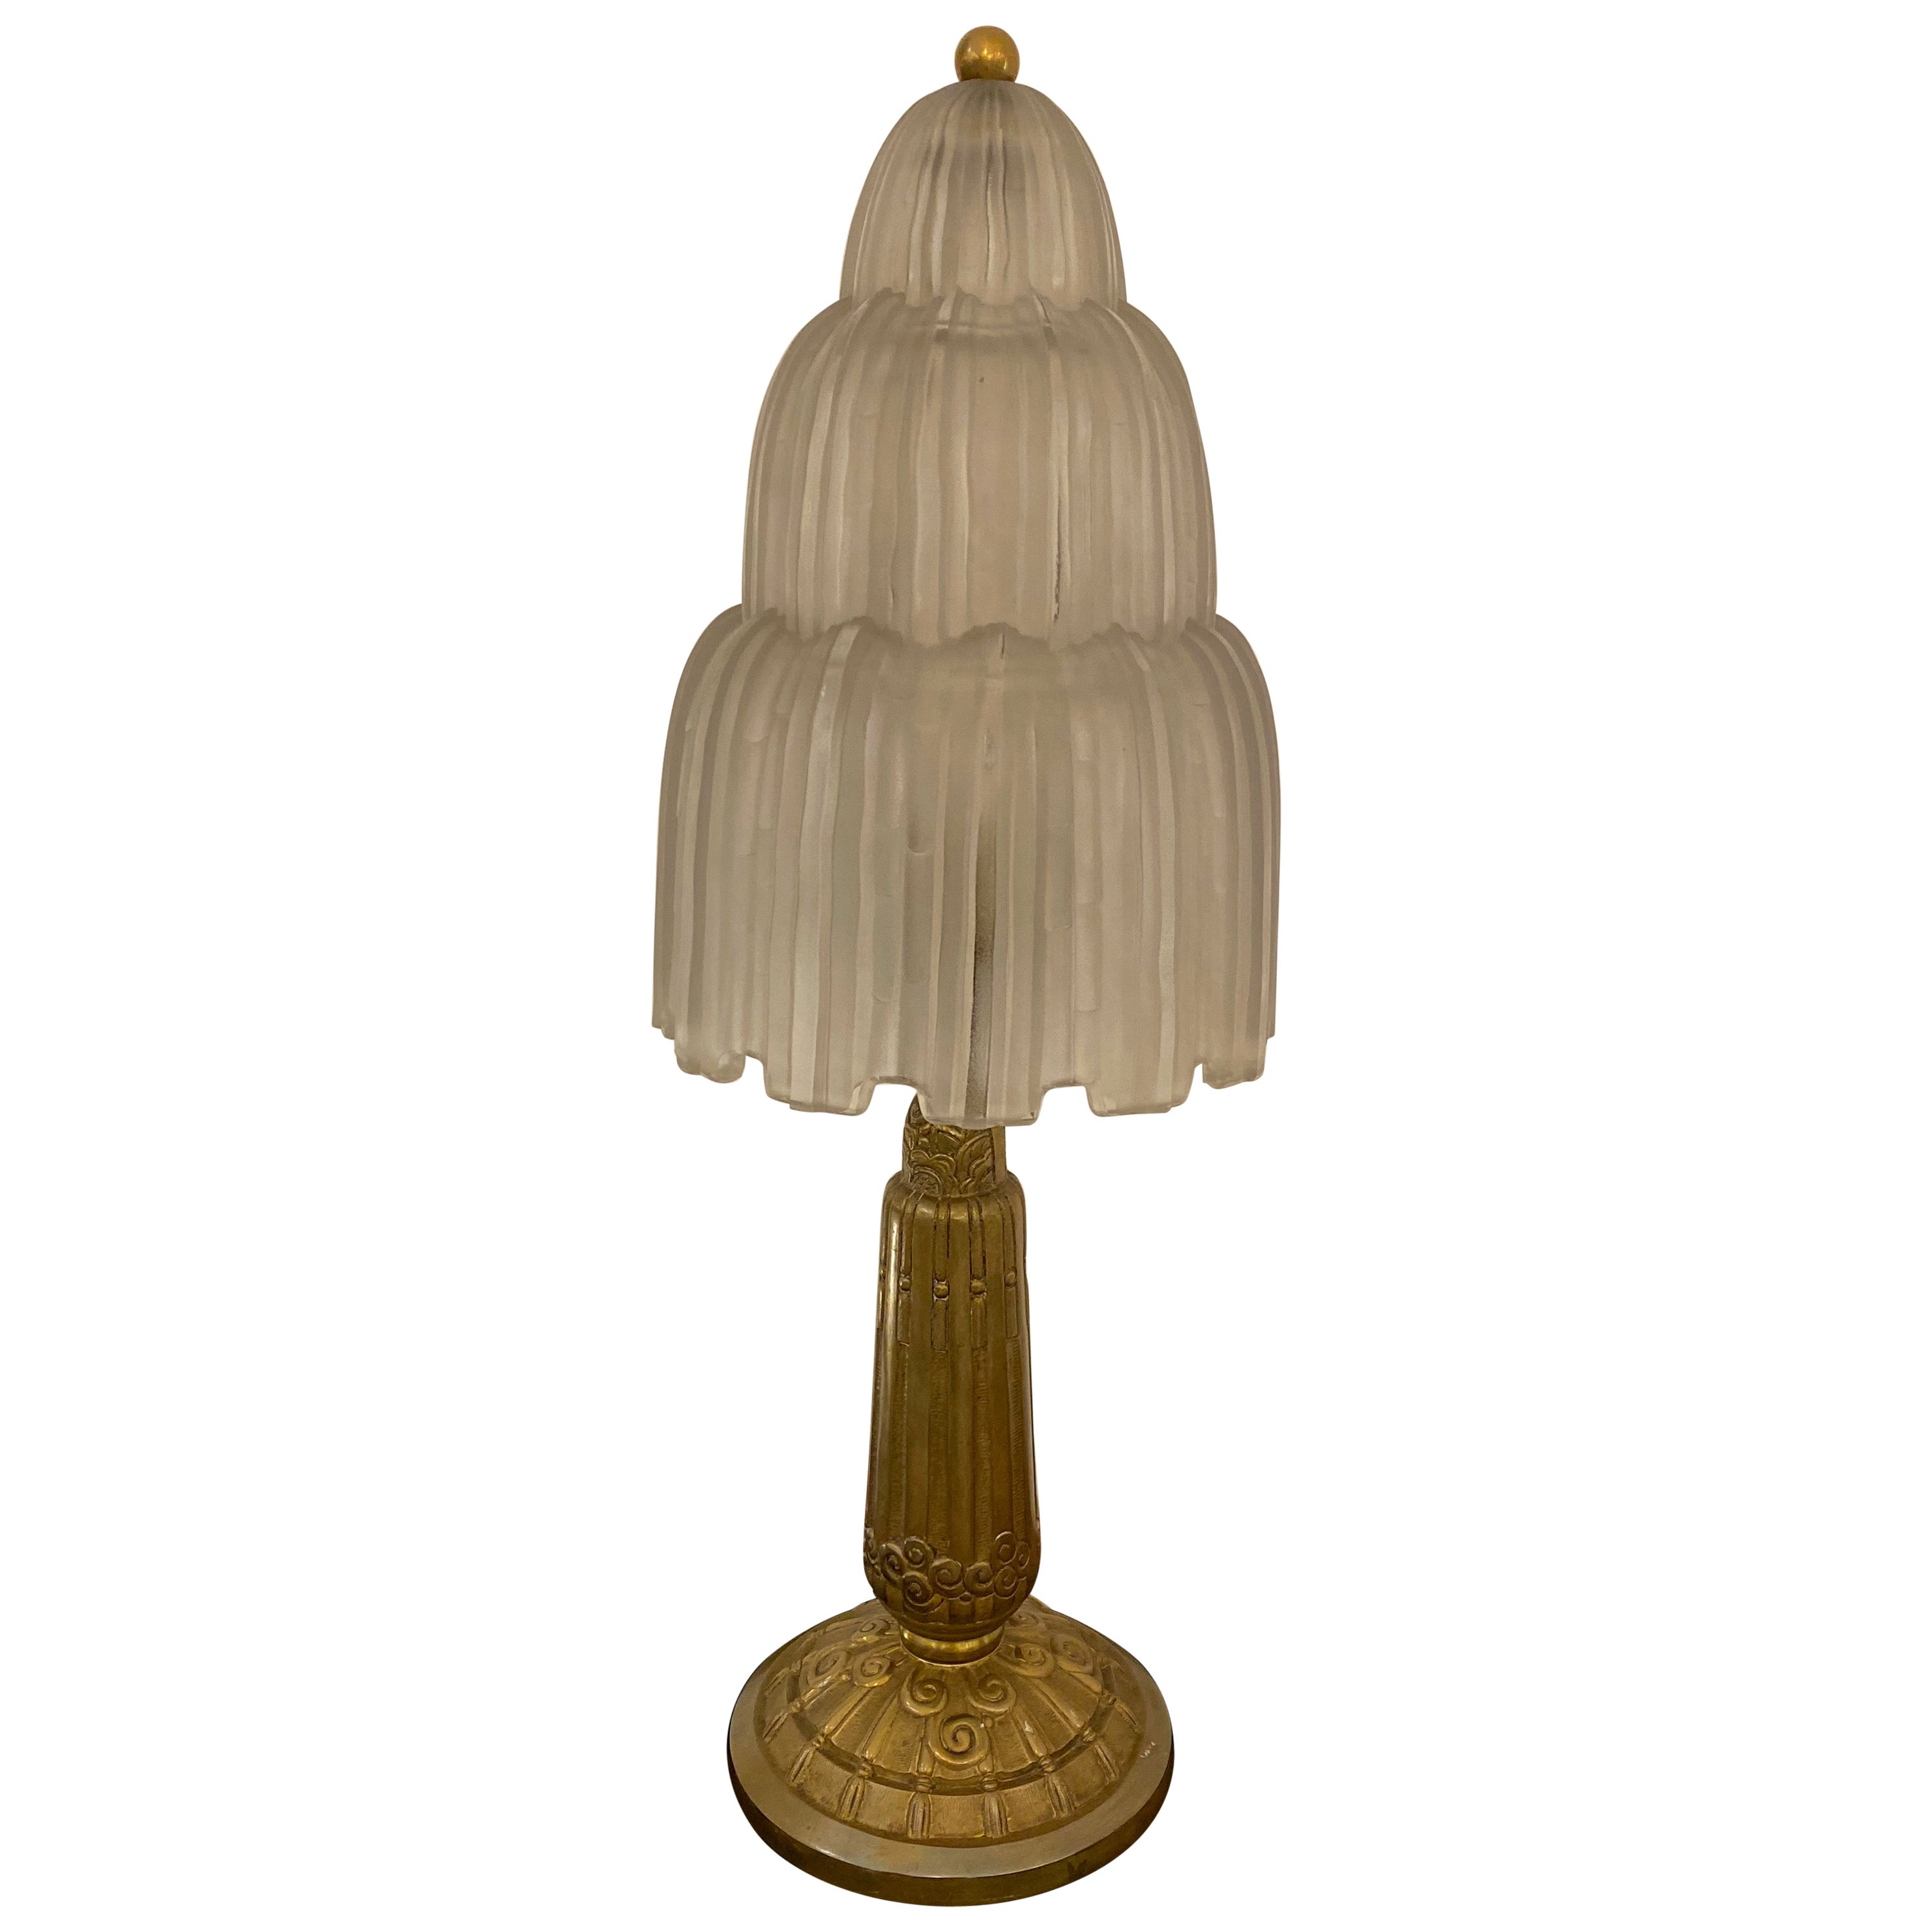 French Art Deco "Waterfall" Table Lamp Signed by Sabino